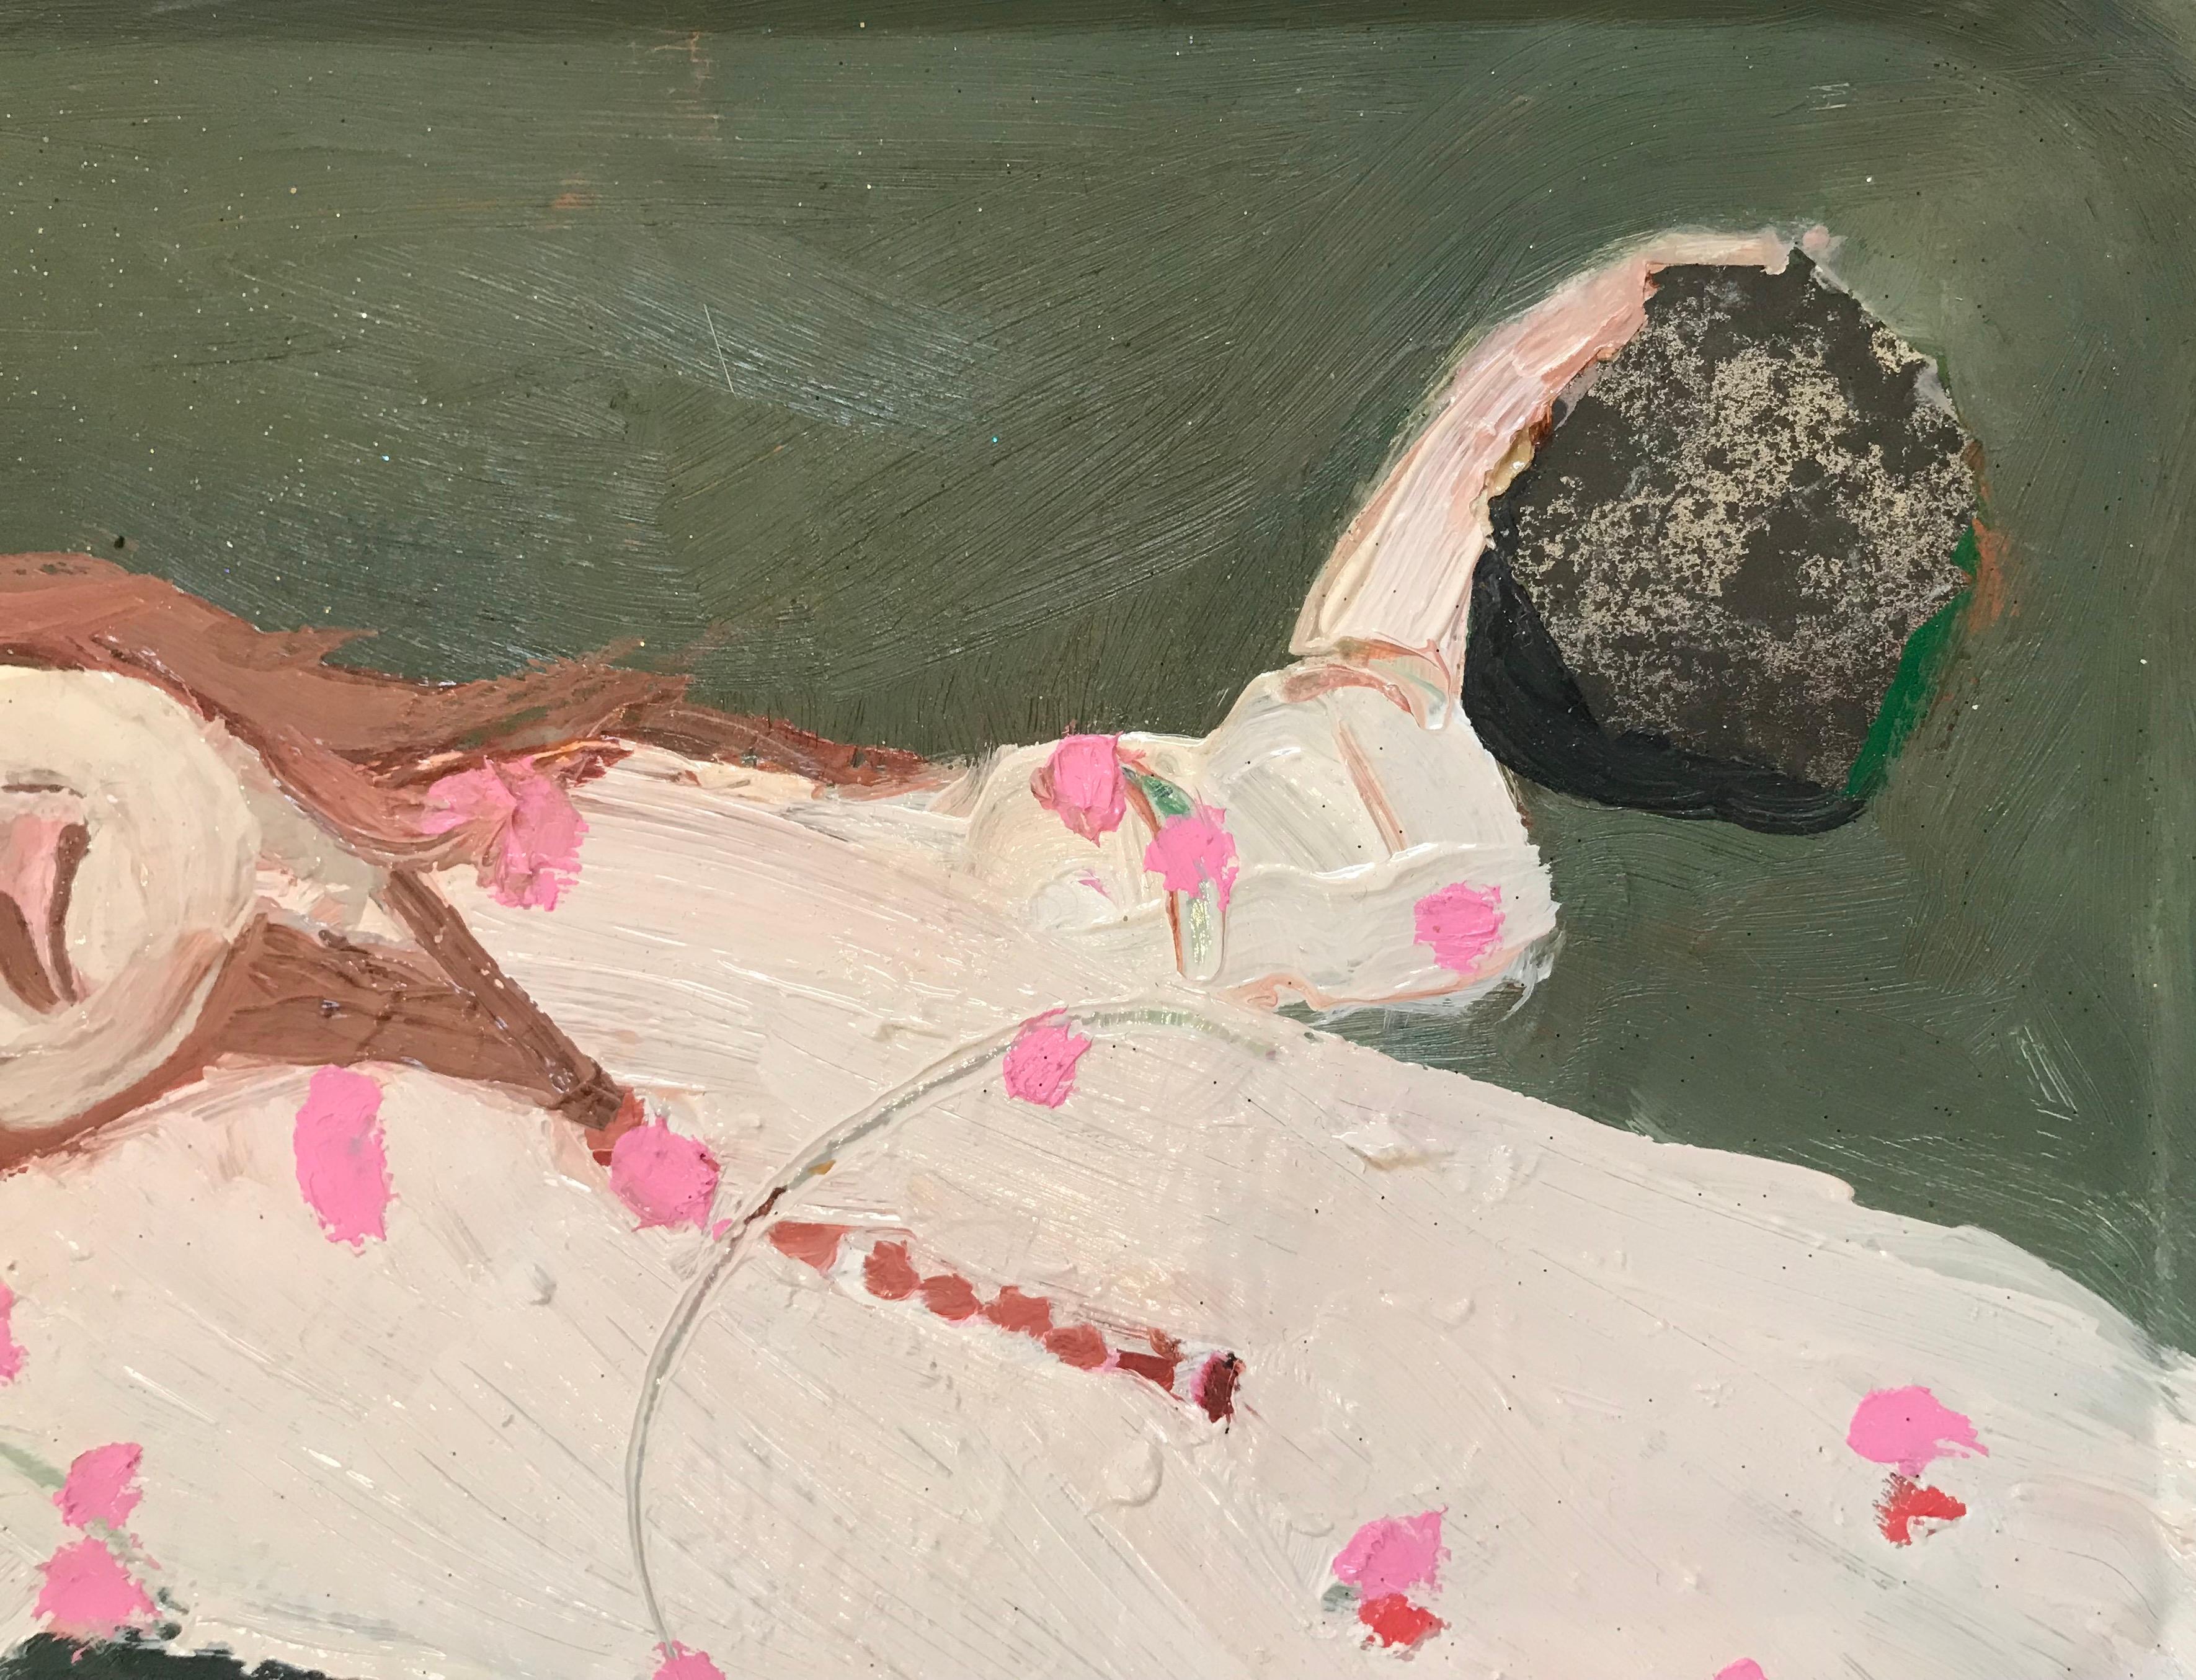 Part of Melora Griffis’ series of small scale oil paintings on found metal trays, “her camera” shows the recumbent figure of a woman in a white dress with pink polka dots, her hand on an object which the artist has defined using negative space,